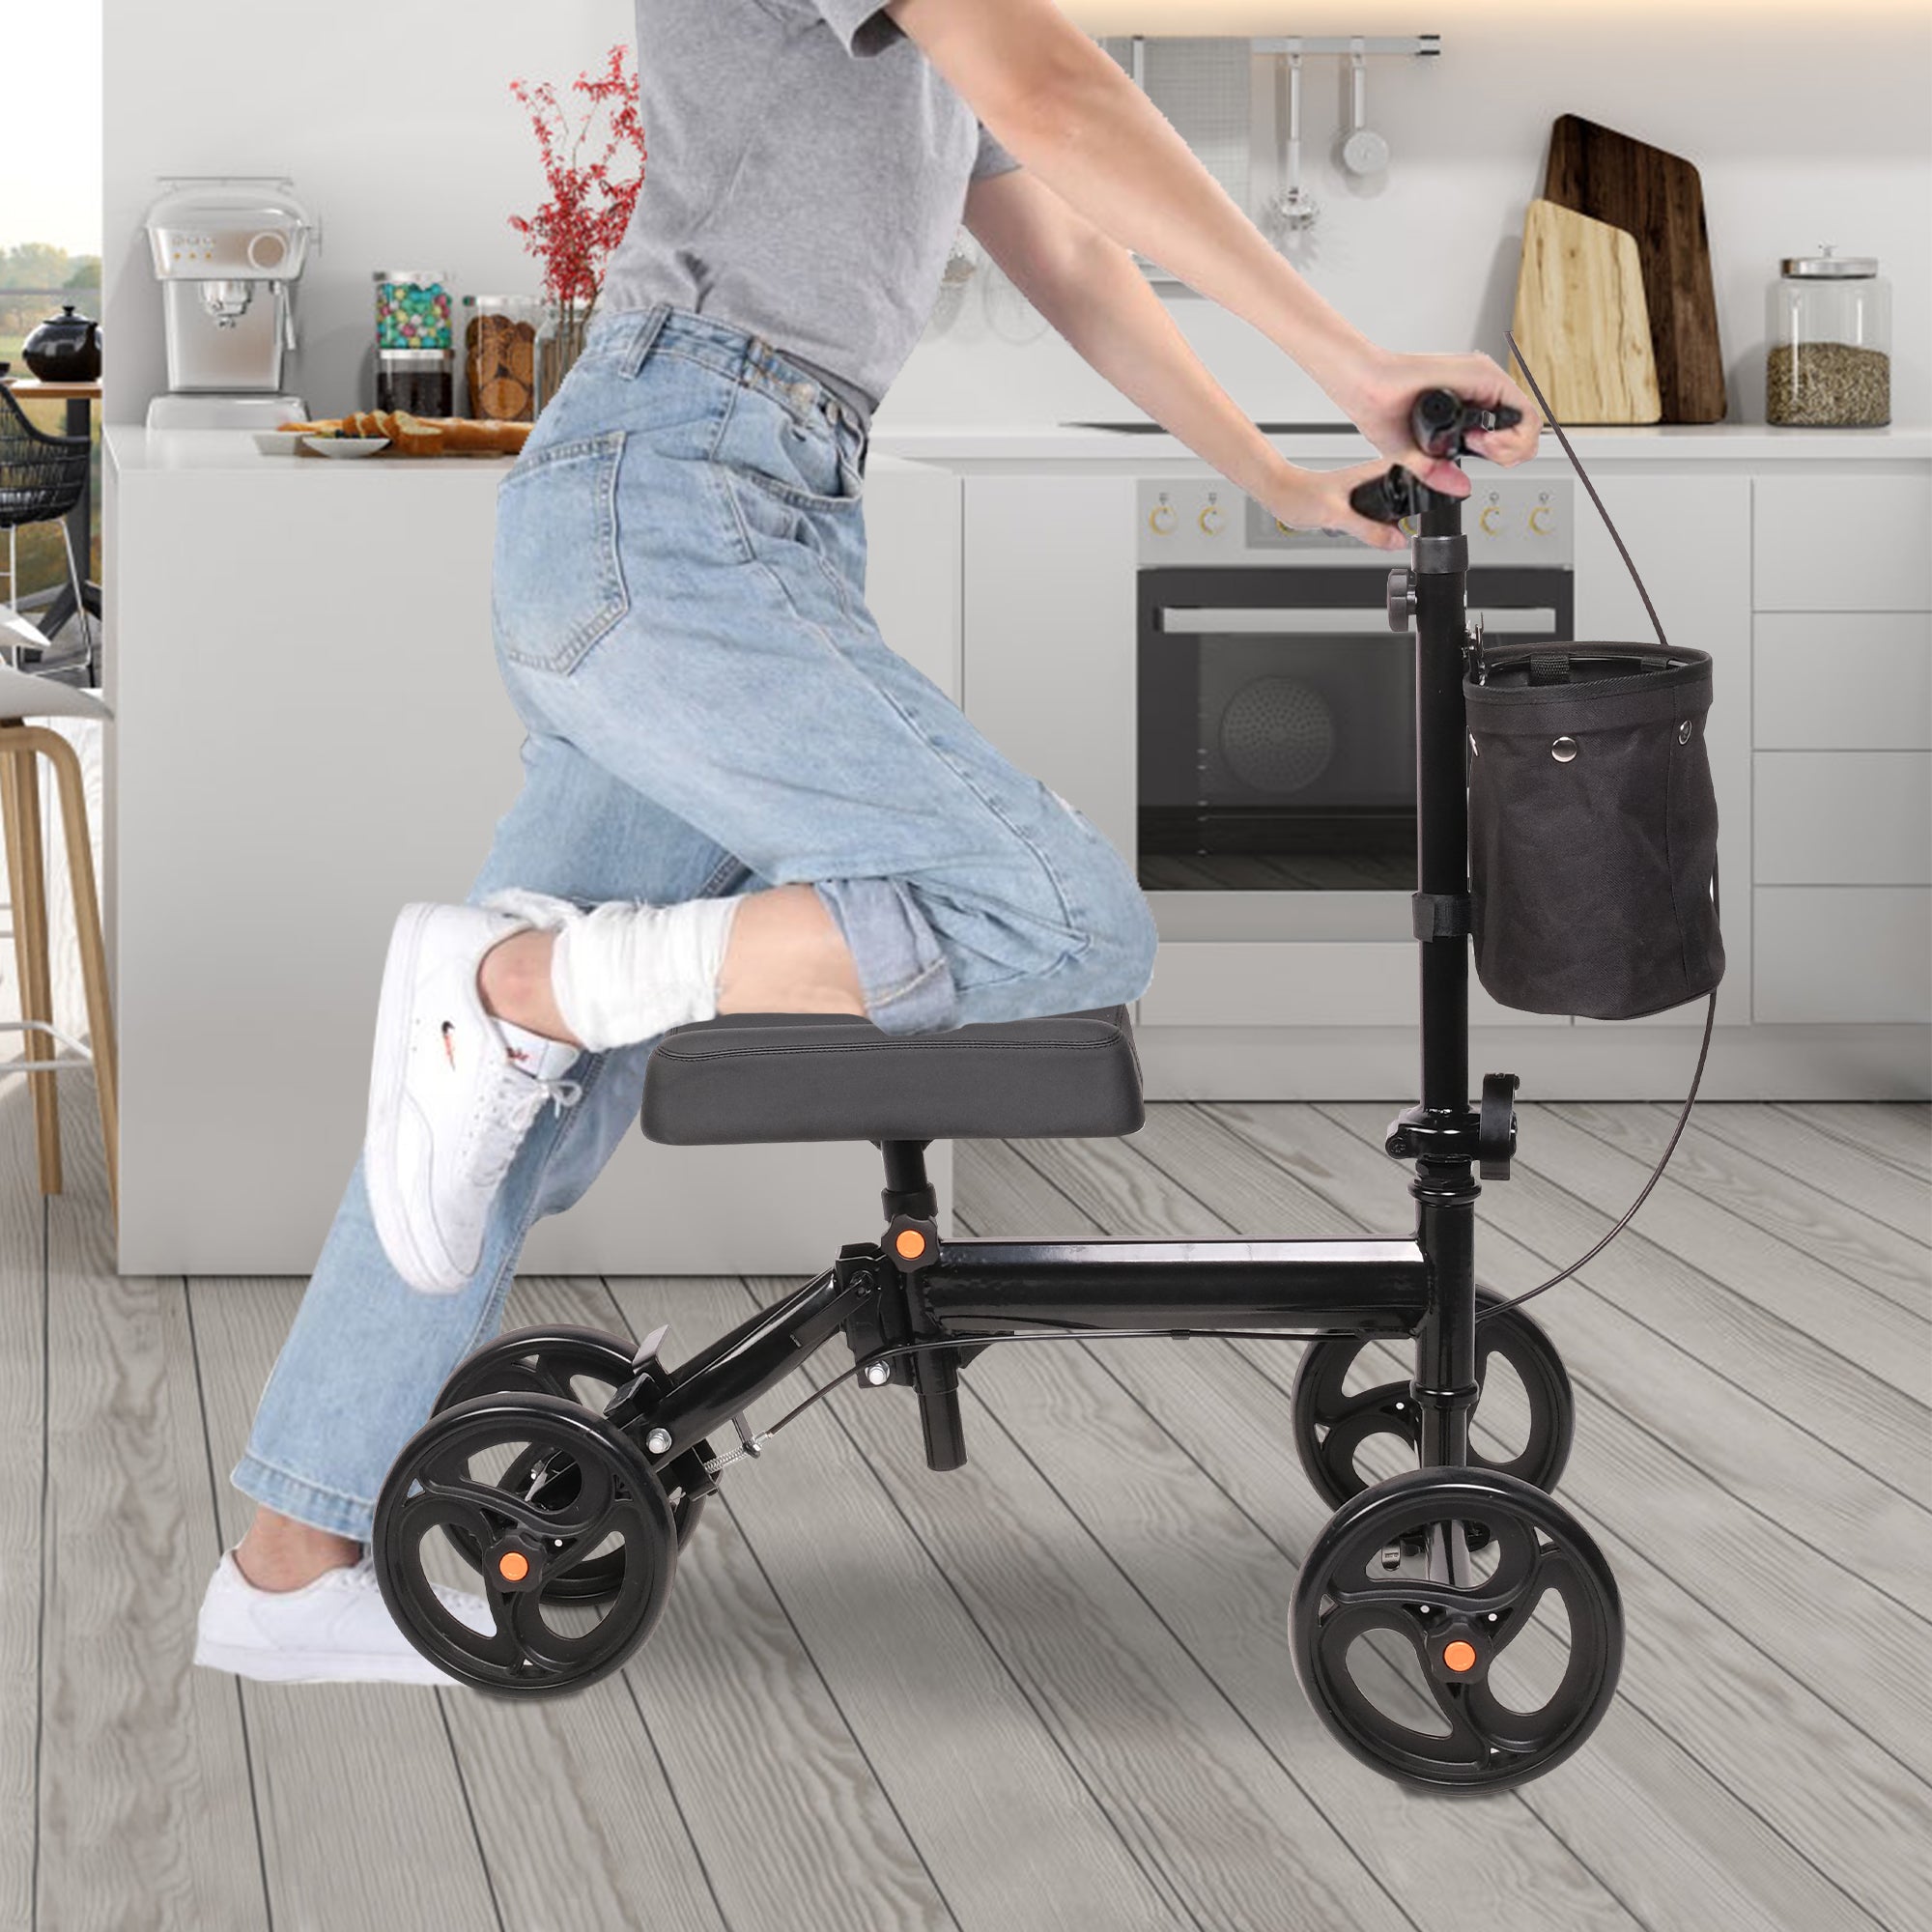 Luckyermore Foldable Knee Walker Adjustable Steerable Knee Scooter Suitable with Foot/Ankle Injuries, Black